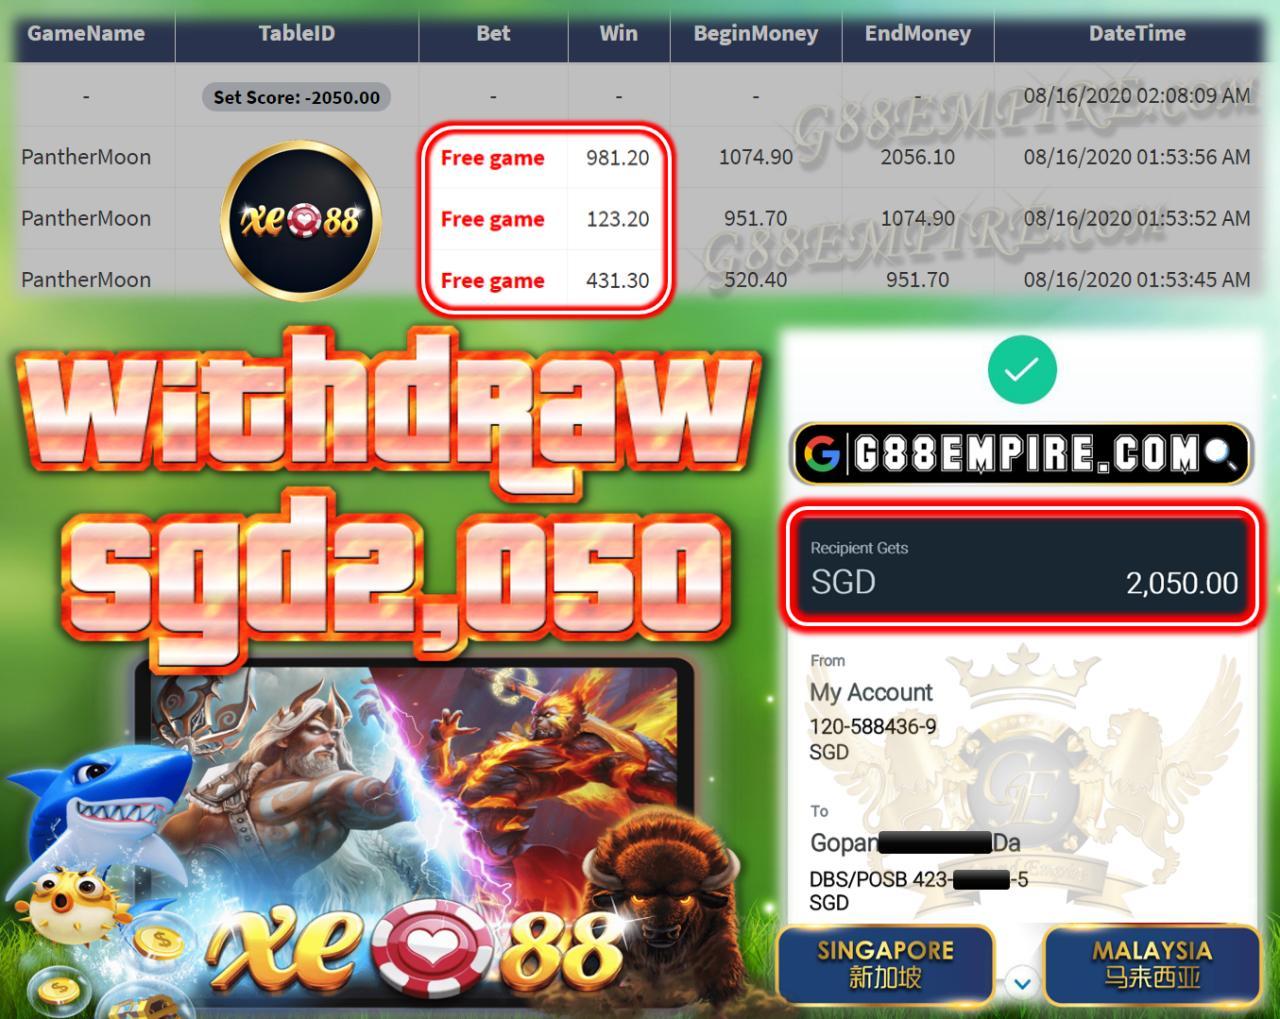 PANTHER MOON FREE GAME WITHDRAW SGD2,050